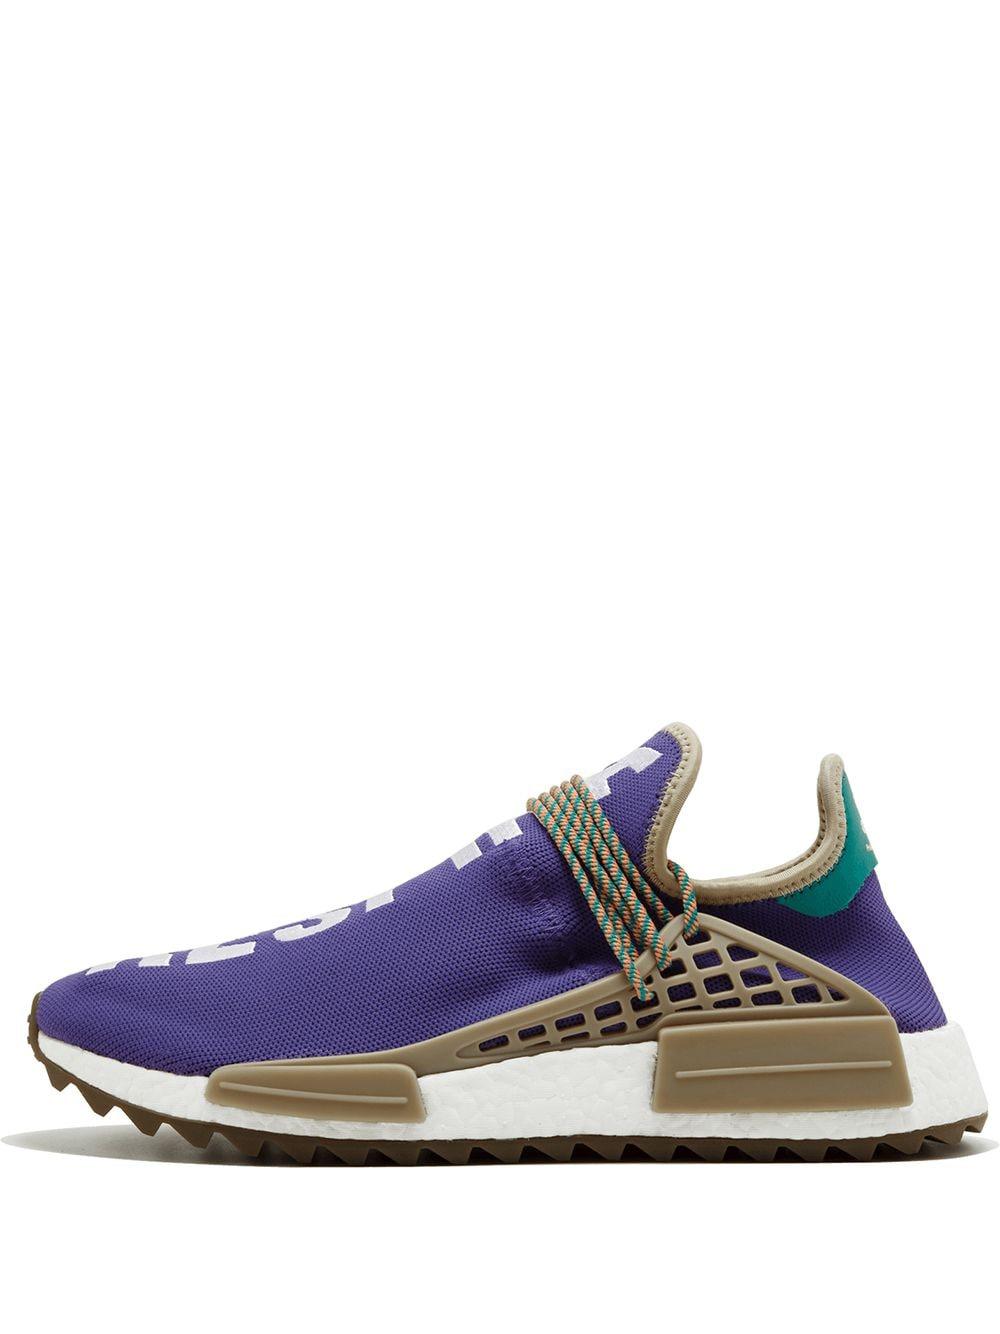 adidas Rubber X Pharrell Williams Human Race Nmd Tr Sneakers in Purple for  Men - Lyst